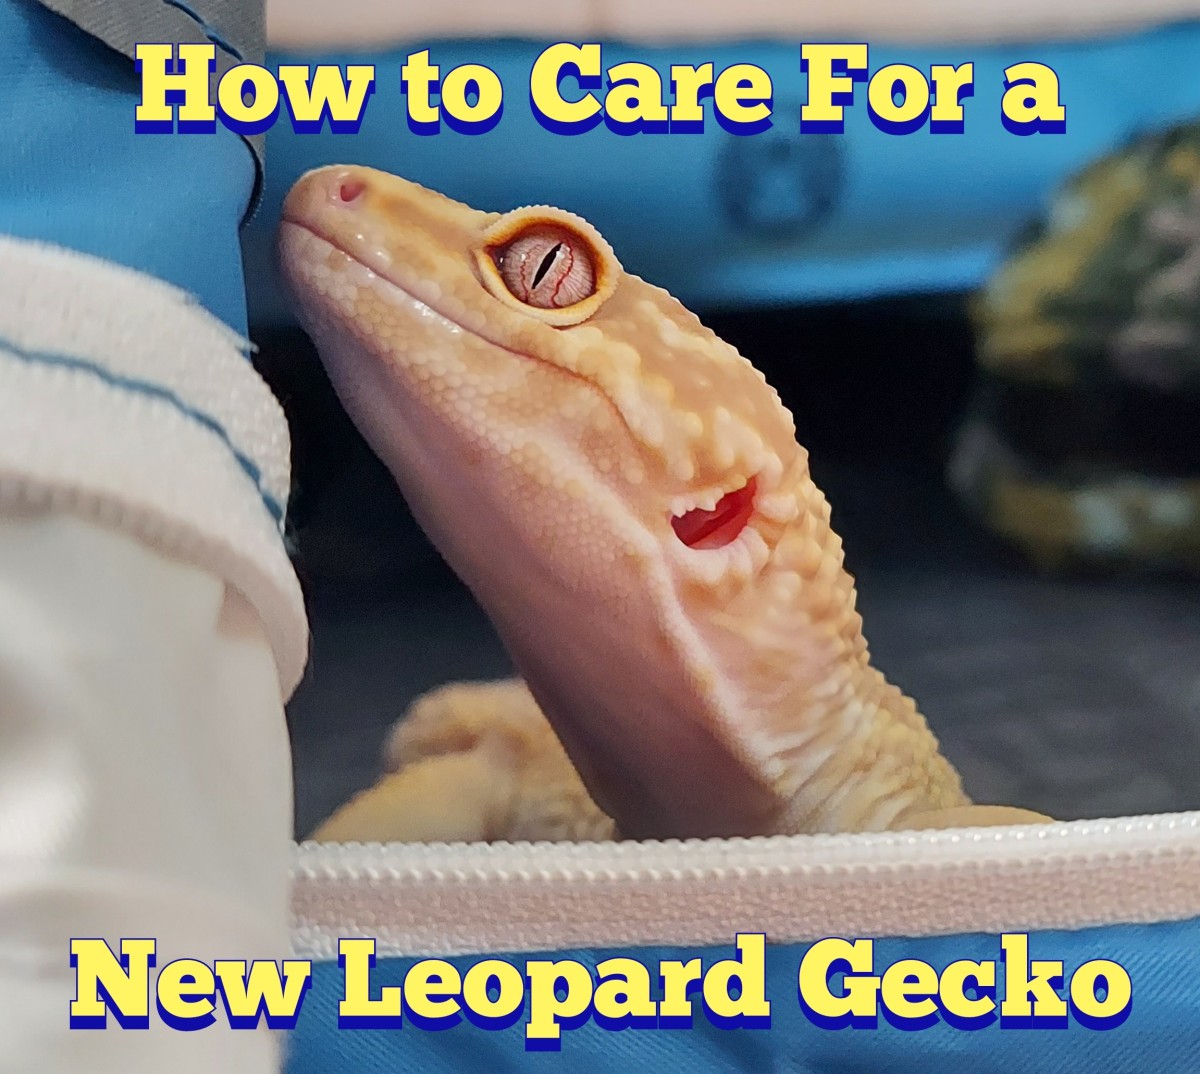 Learn how to care for your new leopard gecko, including enclosure setup, heating, live feeders, and bonding!